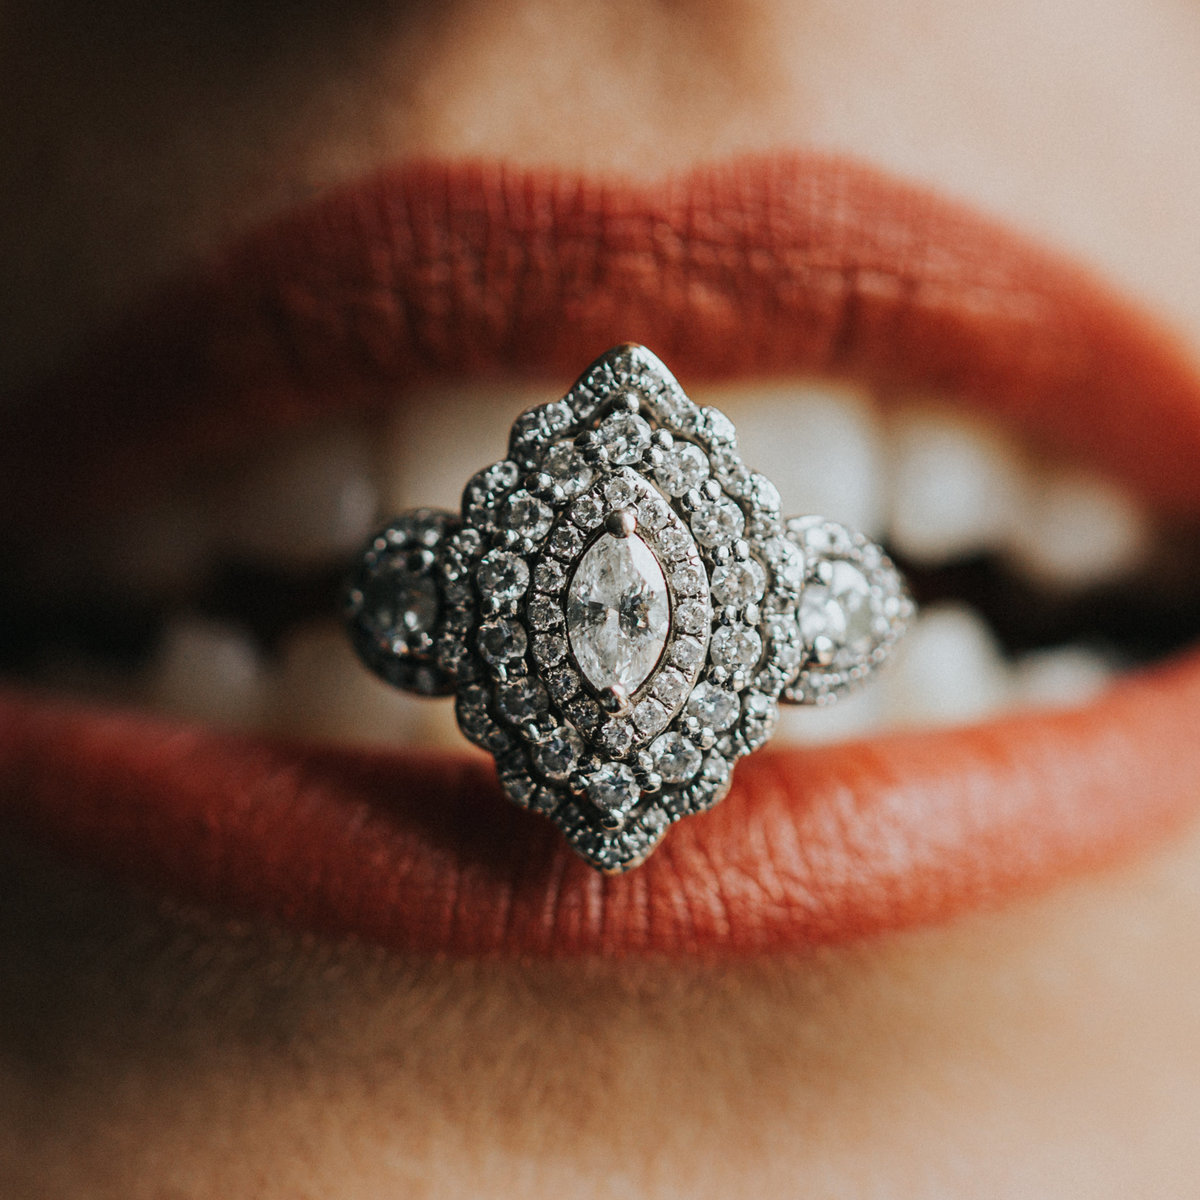 One of the top wedding photos of 2020. Taken by Adore Wedding Photography- Toledo, Ohio Wedding Photographers. This photo is of a custom engagement ring clenched between the brides teeth and red lips. The award winning wedding photo was taken in Toledo Ohio